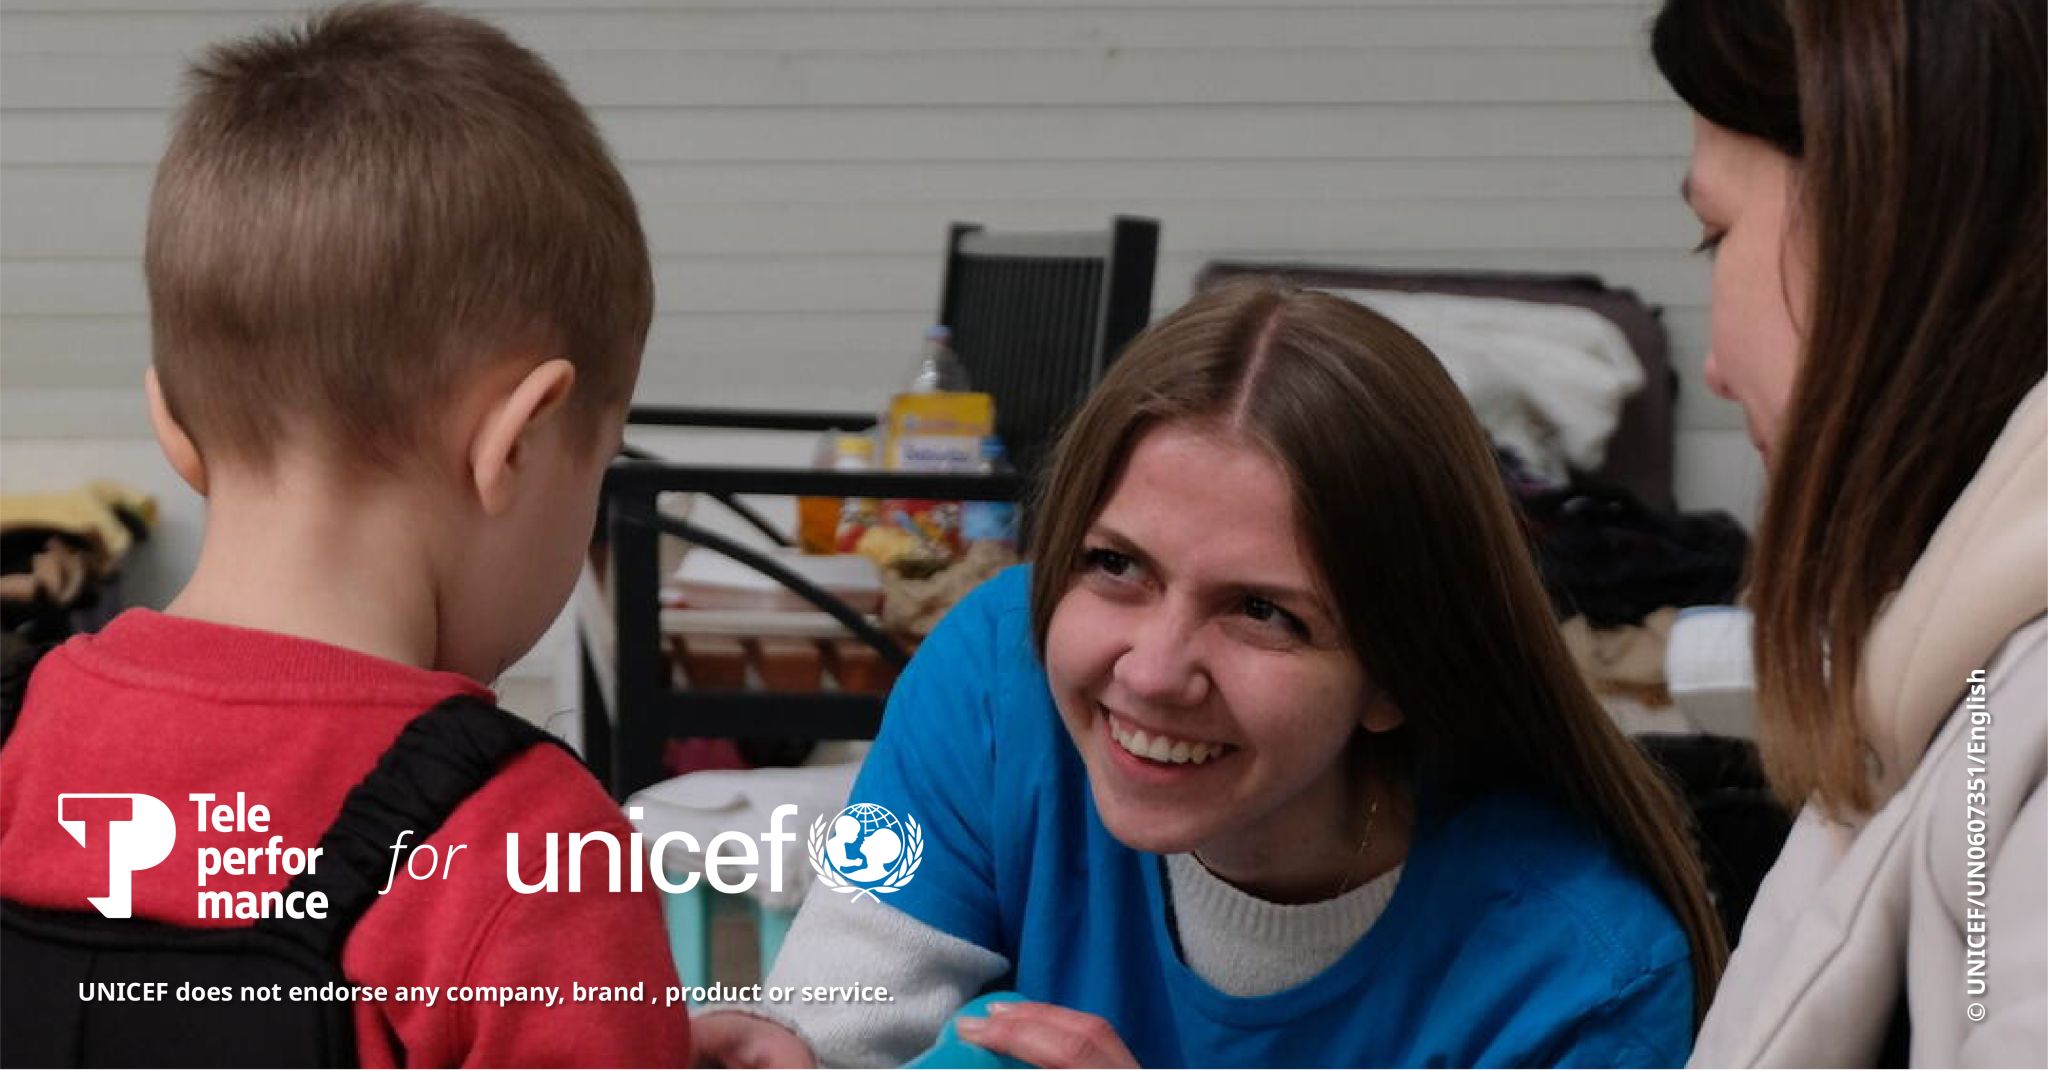 UNICEF and Teleperformance collaborate to boost child education and international disaster relief